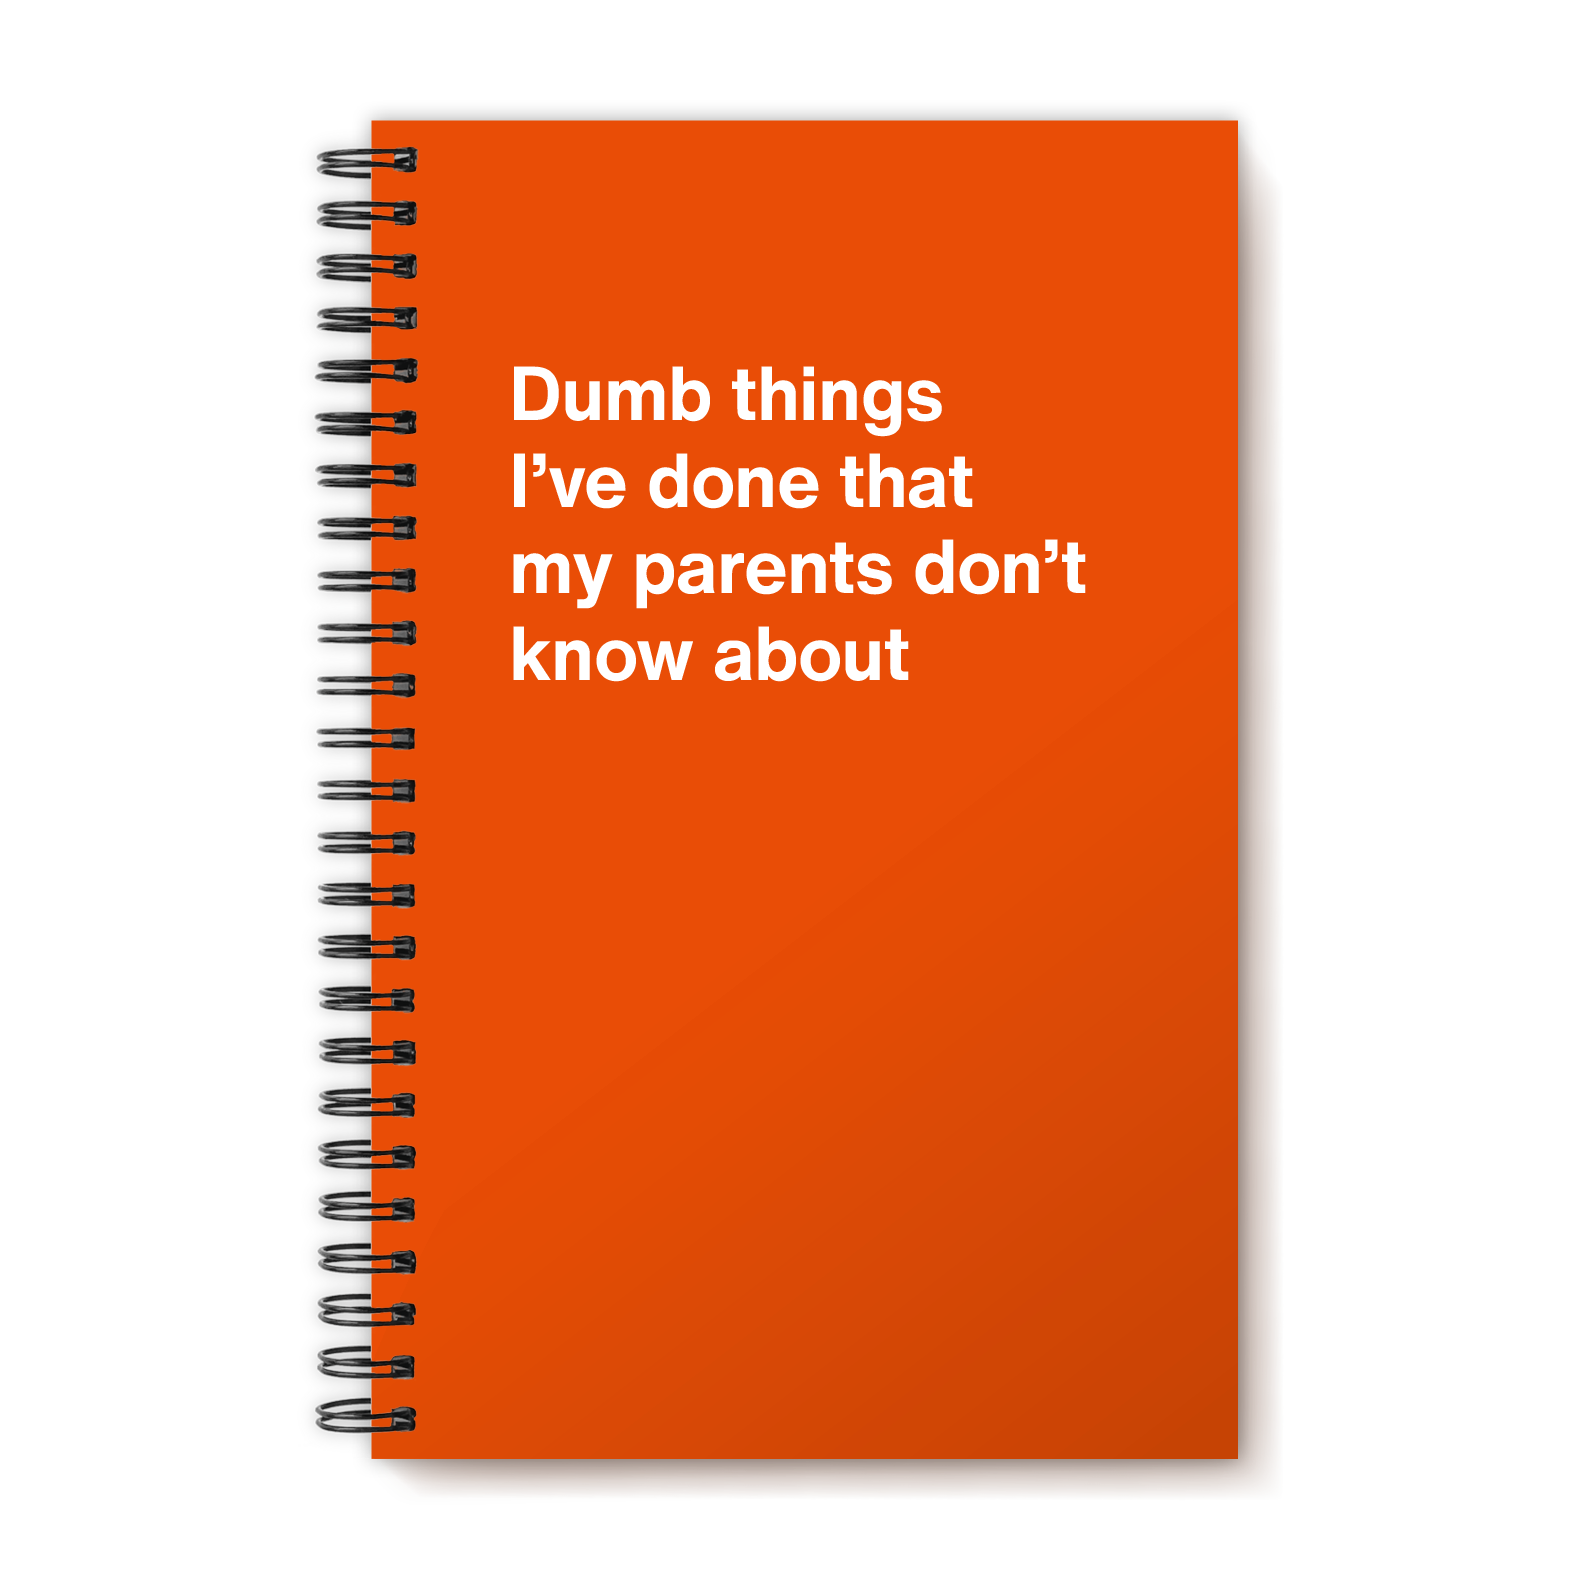 Dumb things I've done that my parents don't know about | WTF Notebooks